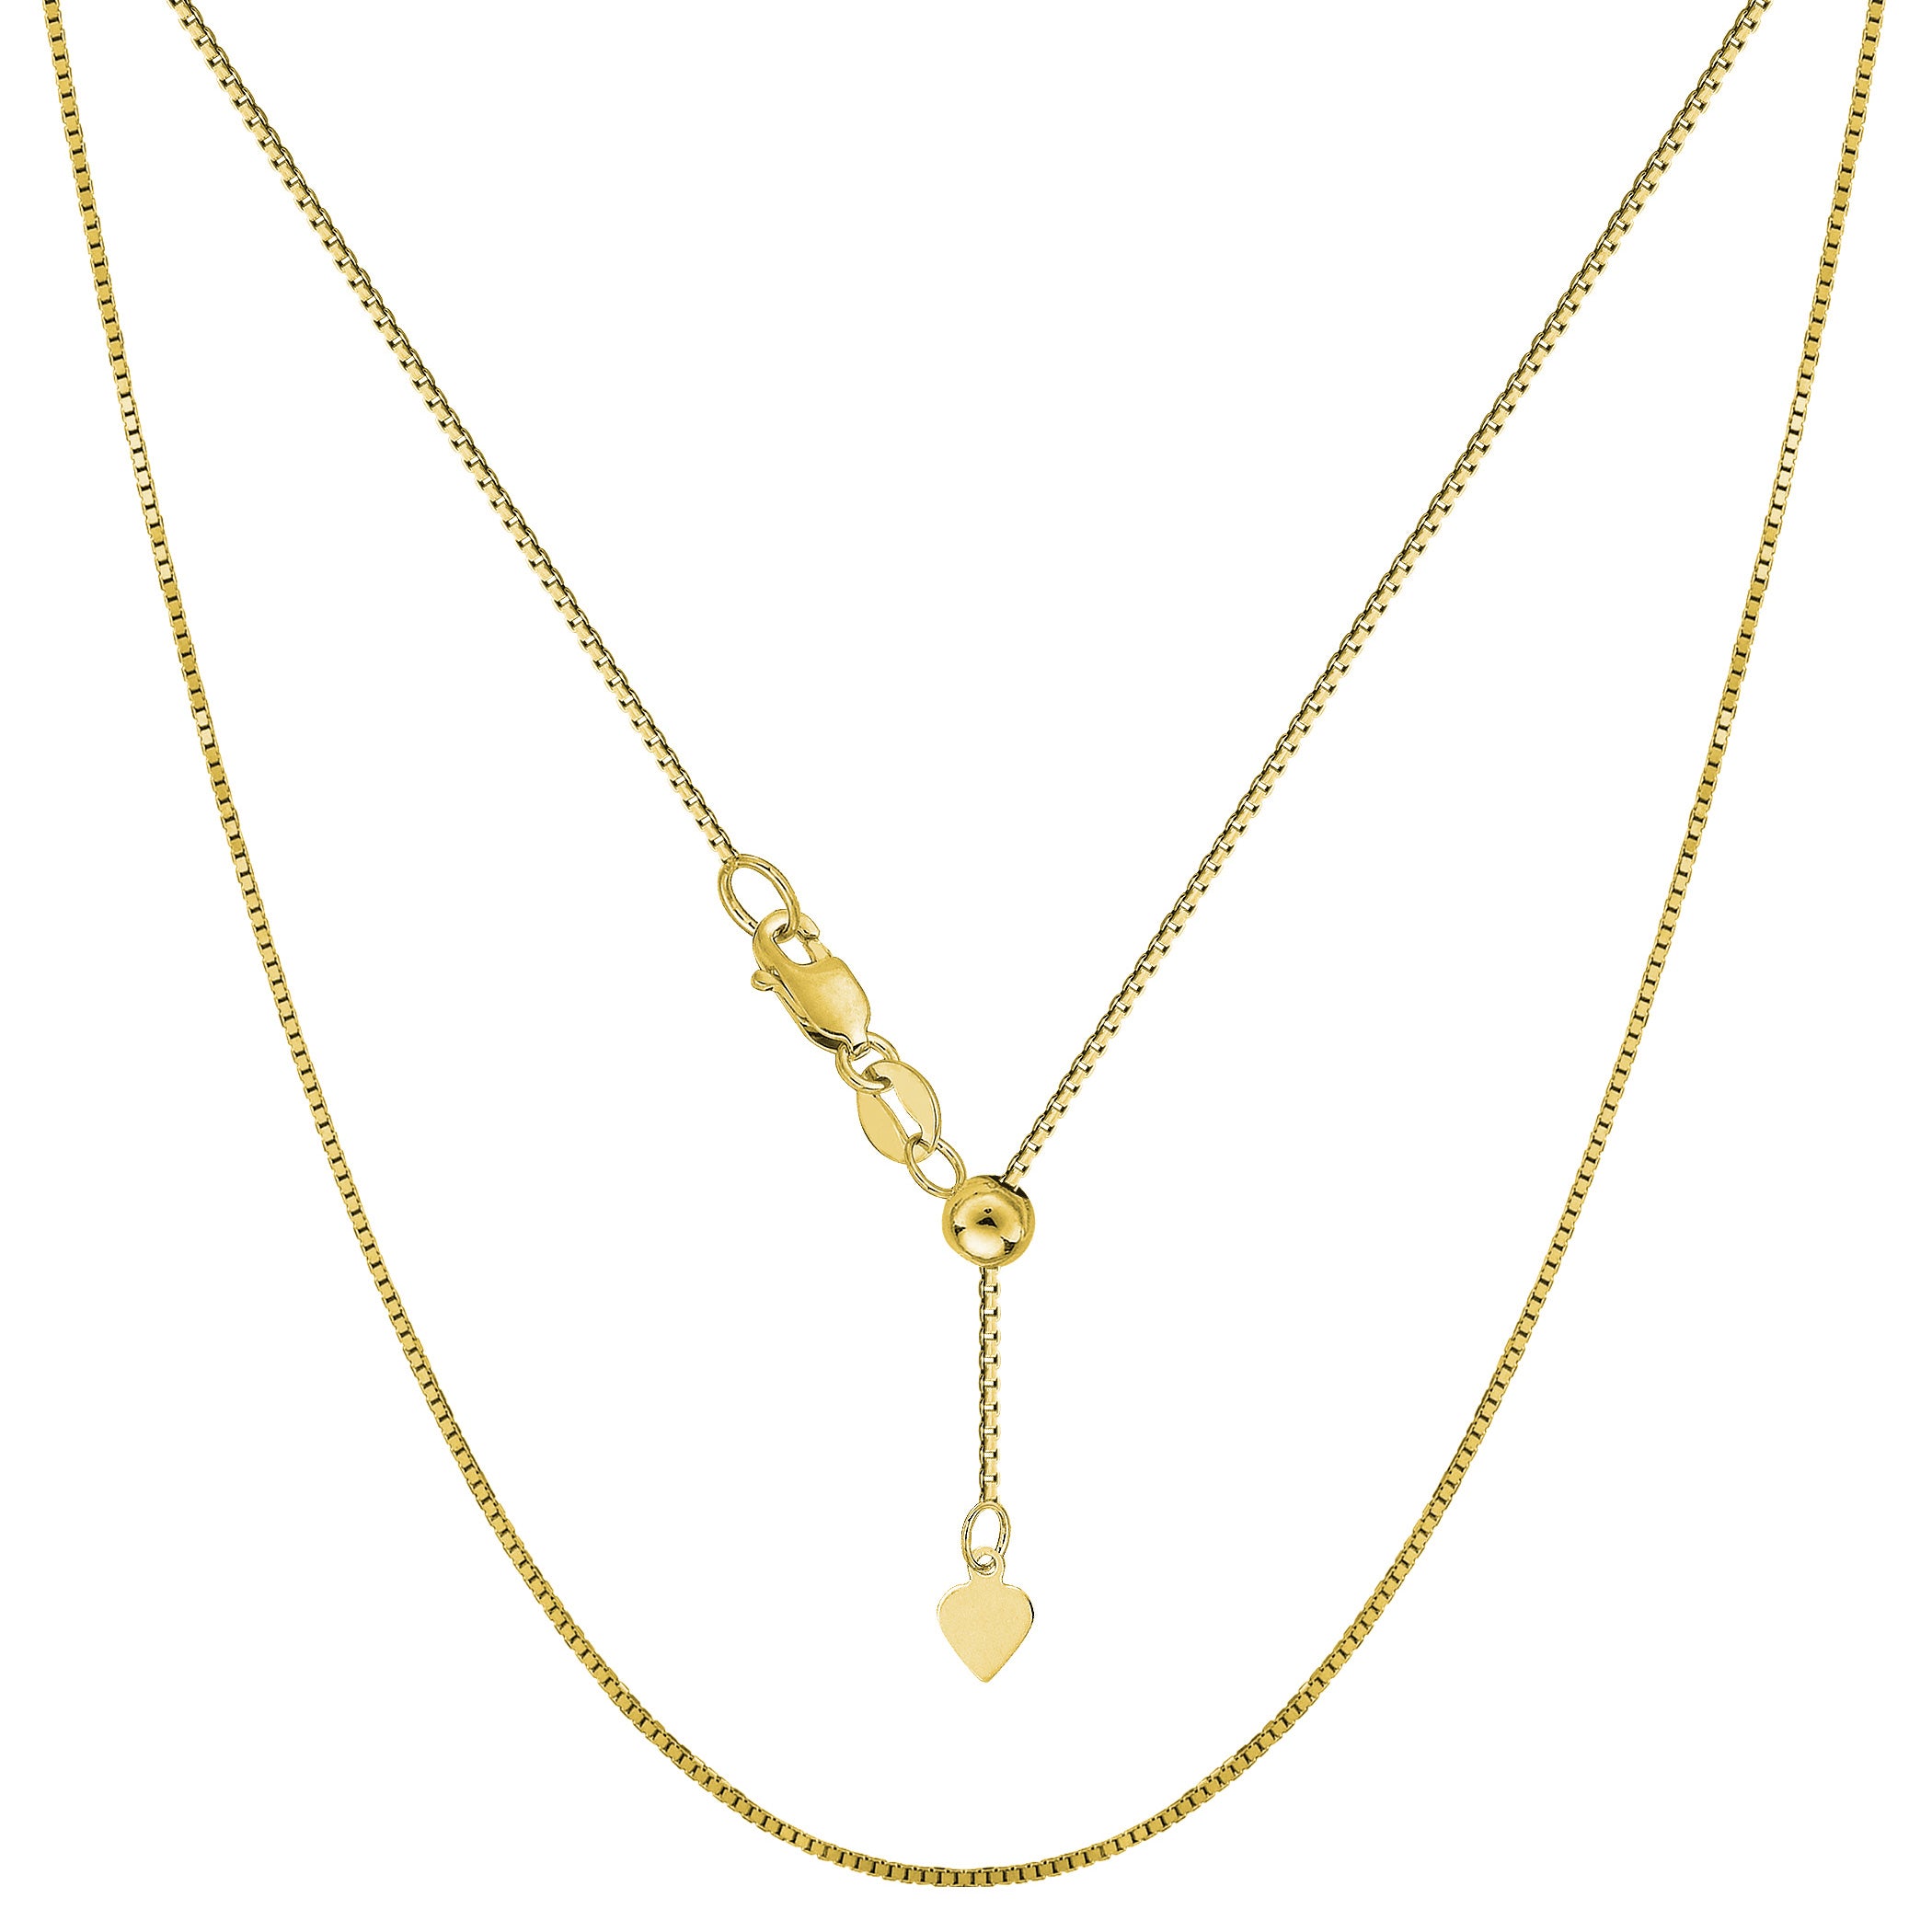 14k Yellow Gold Adjustable Box Chain Necklace, 0.7mm, 22" fine designer jewelry for men and women